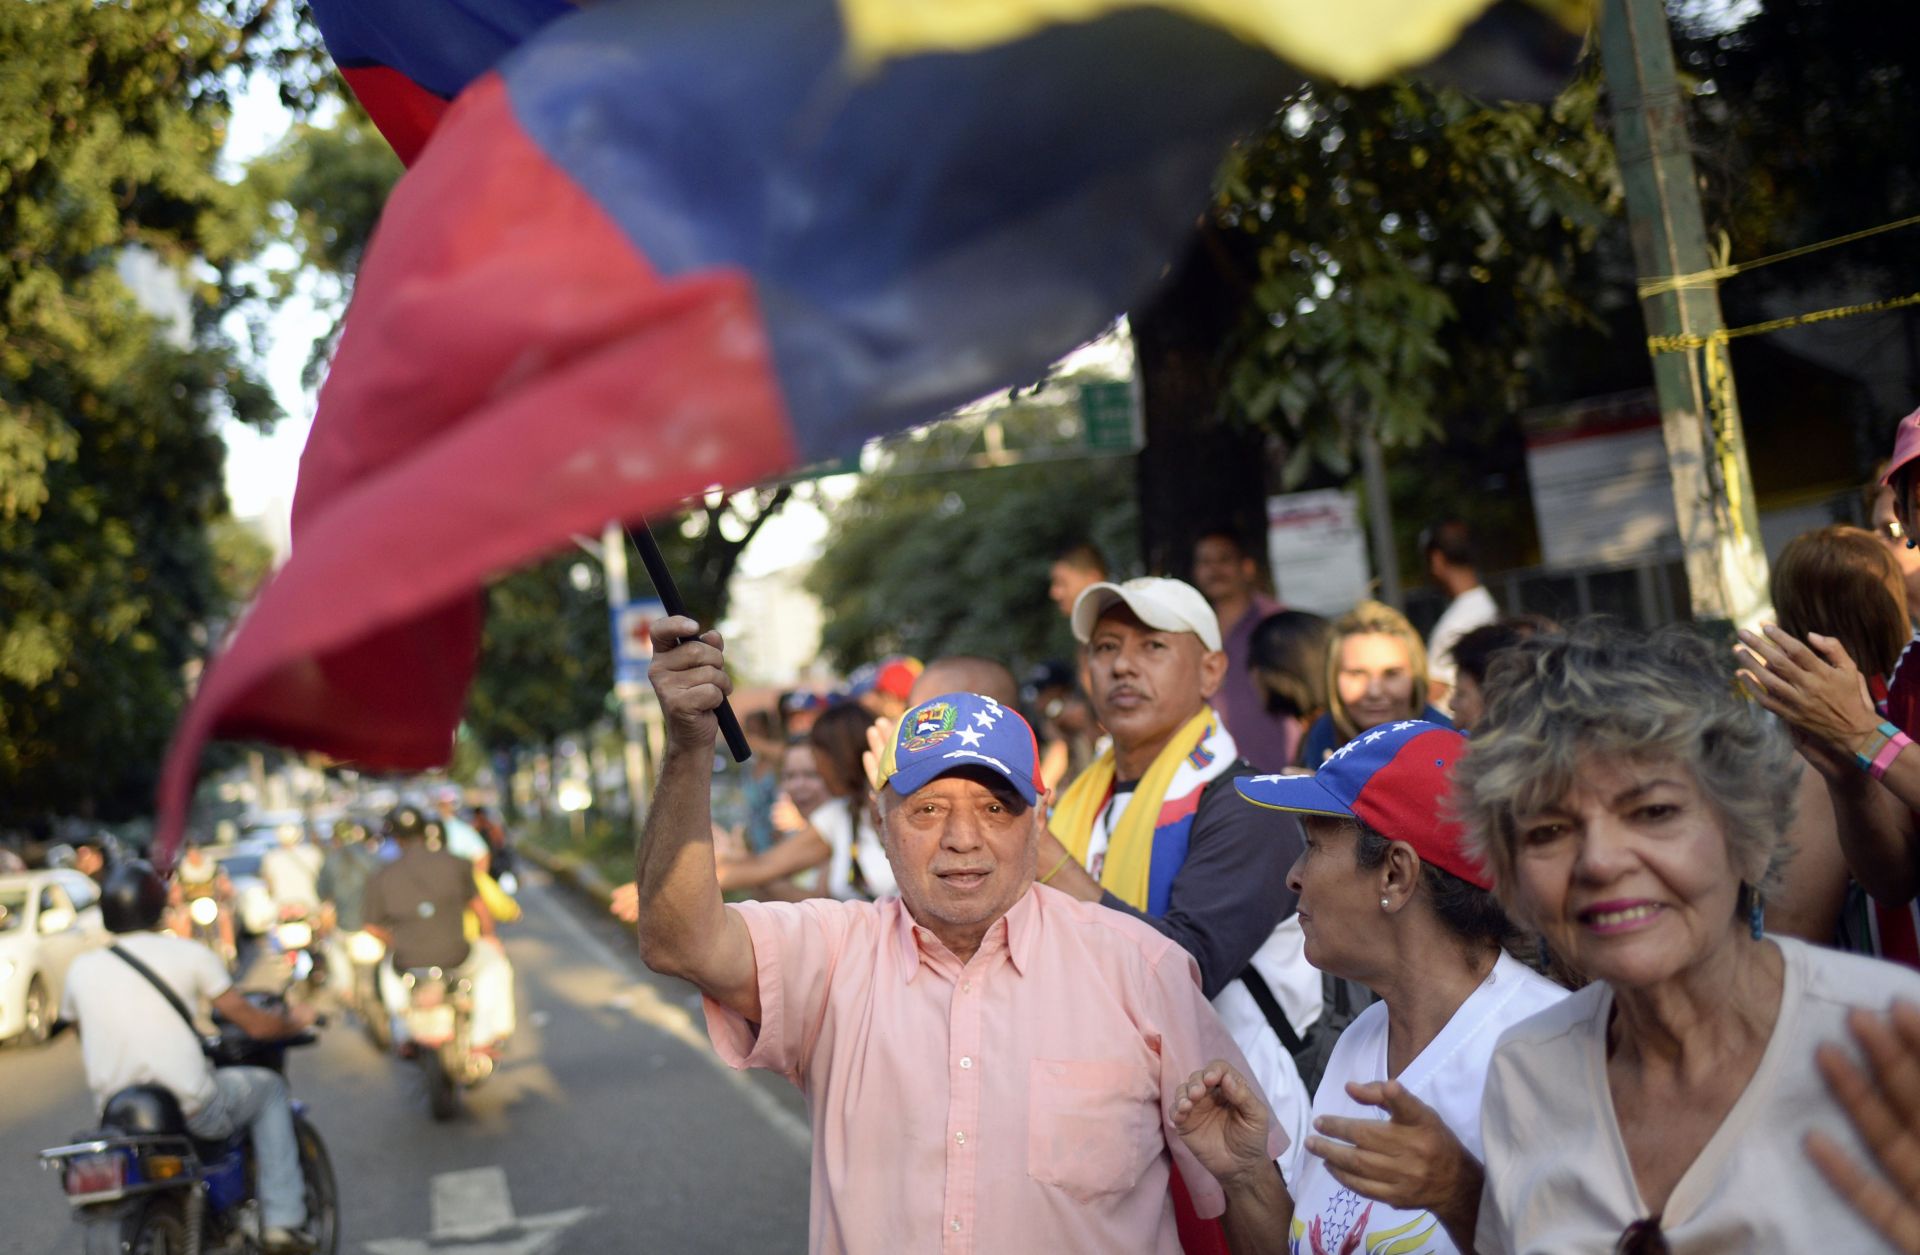 Opponents of Venezuela's constitutional assembly rally in Caracas after a symbolic vote against the measure. The vote to authorize the body that will rewrite the country's constitution will be held July 30.